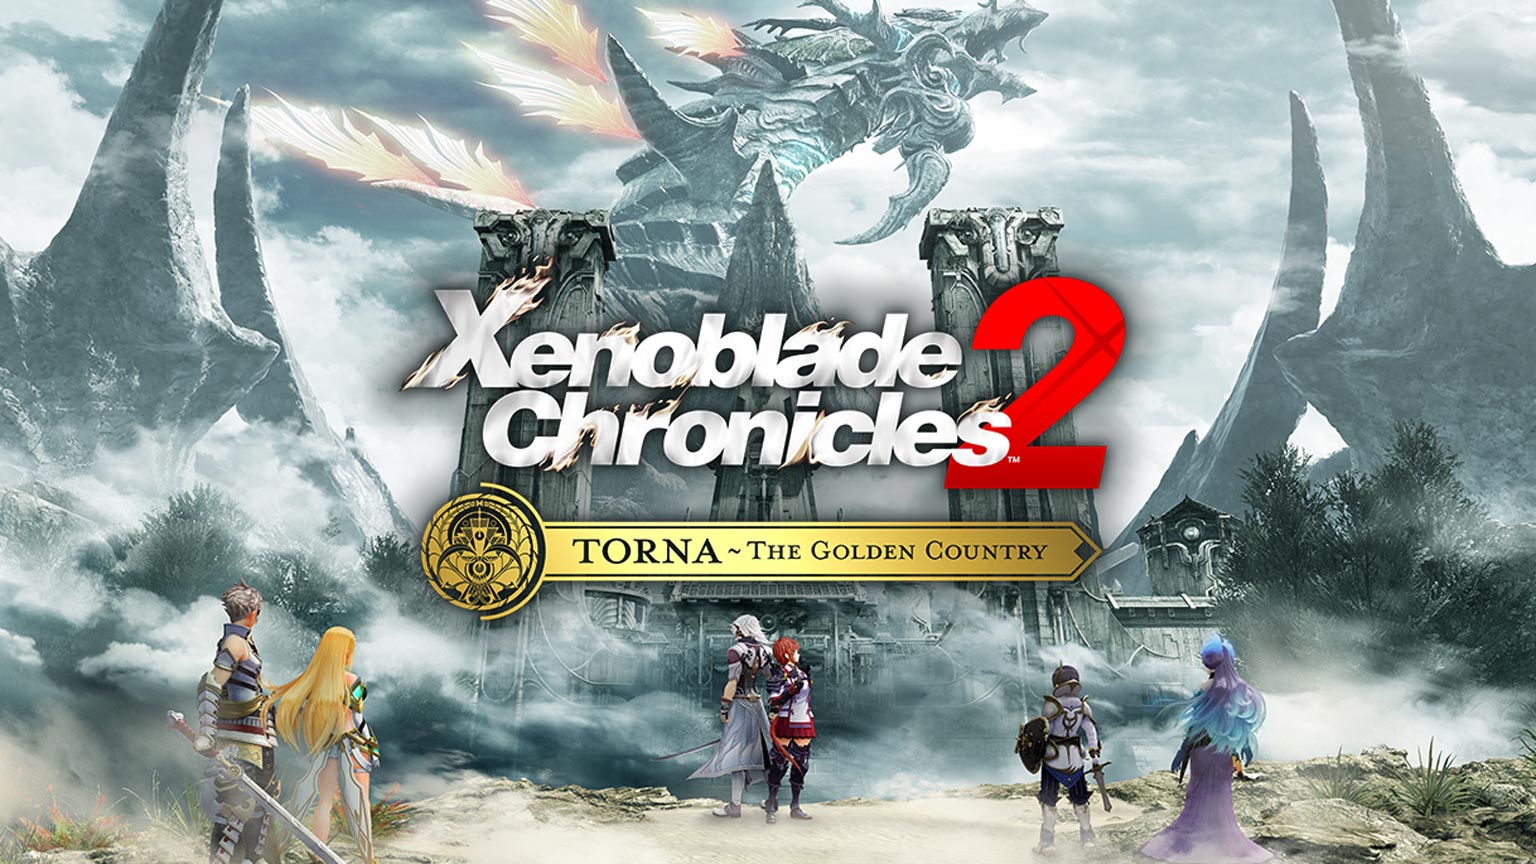 Xenoblade Chronicles 2:Torna The Golden Country